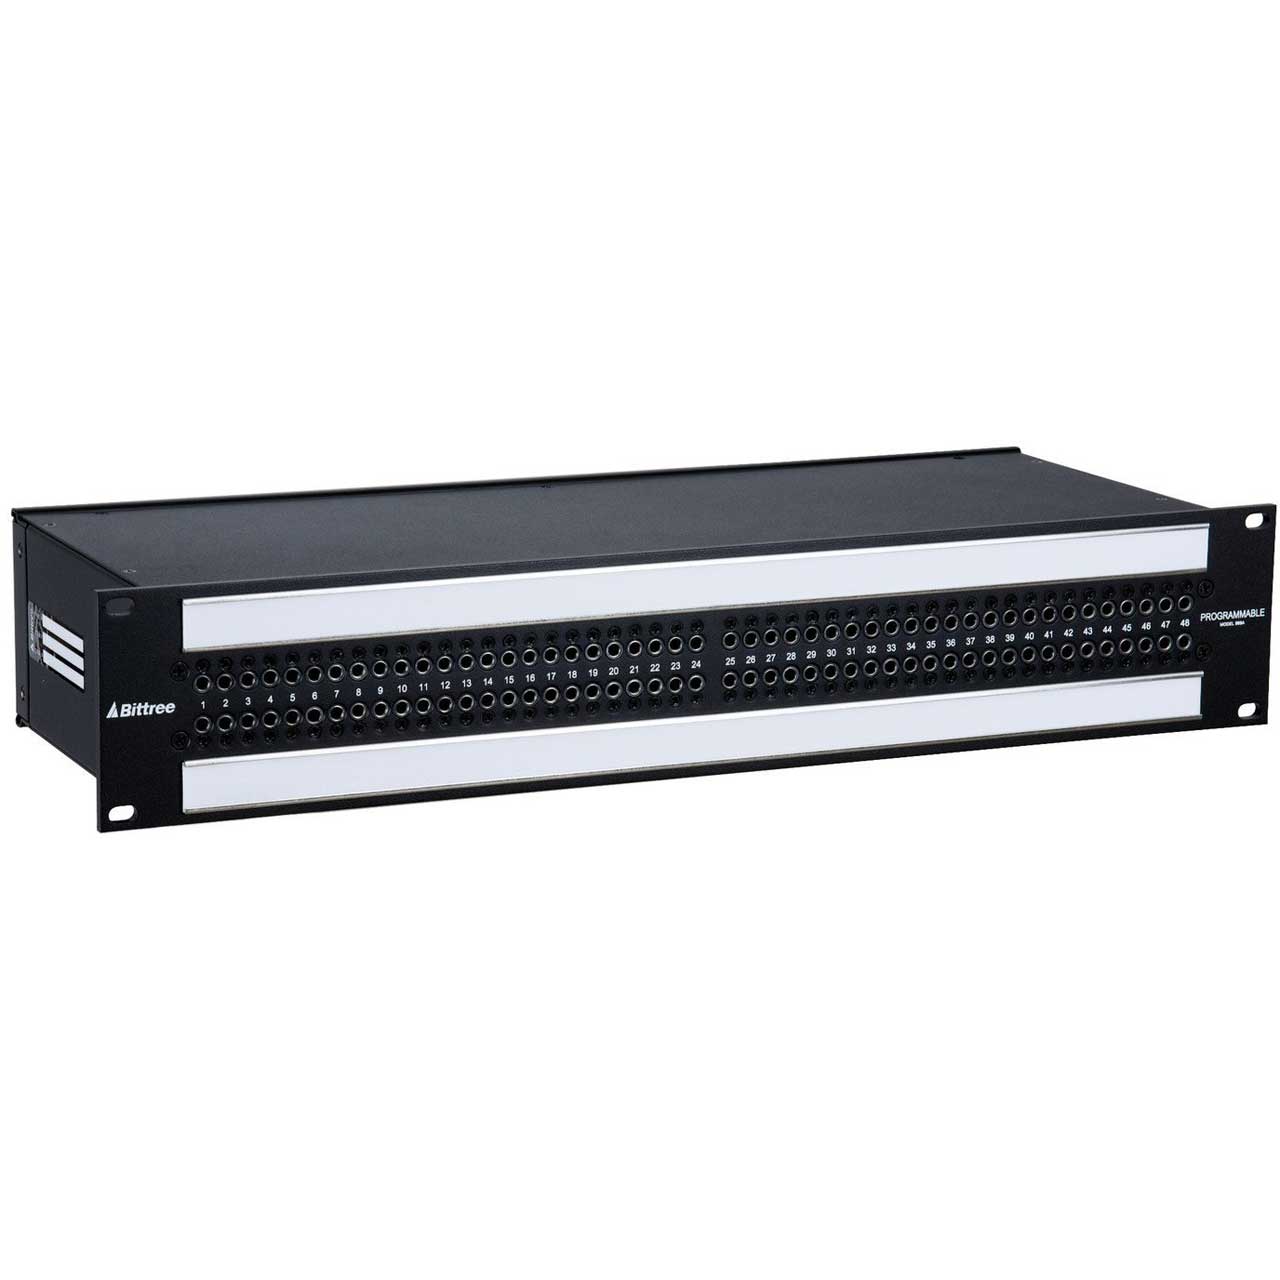 Bittree B96DC-FNAIT/E3 M2OU7B 2RU 2x48 Mono Spaced Audio Patch Panel with 2 Over/Under Type Designation Strips - Black